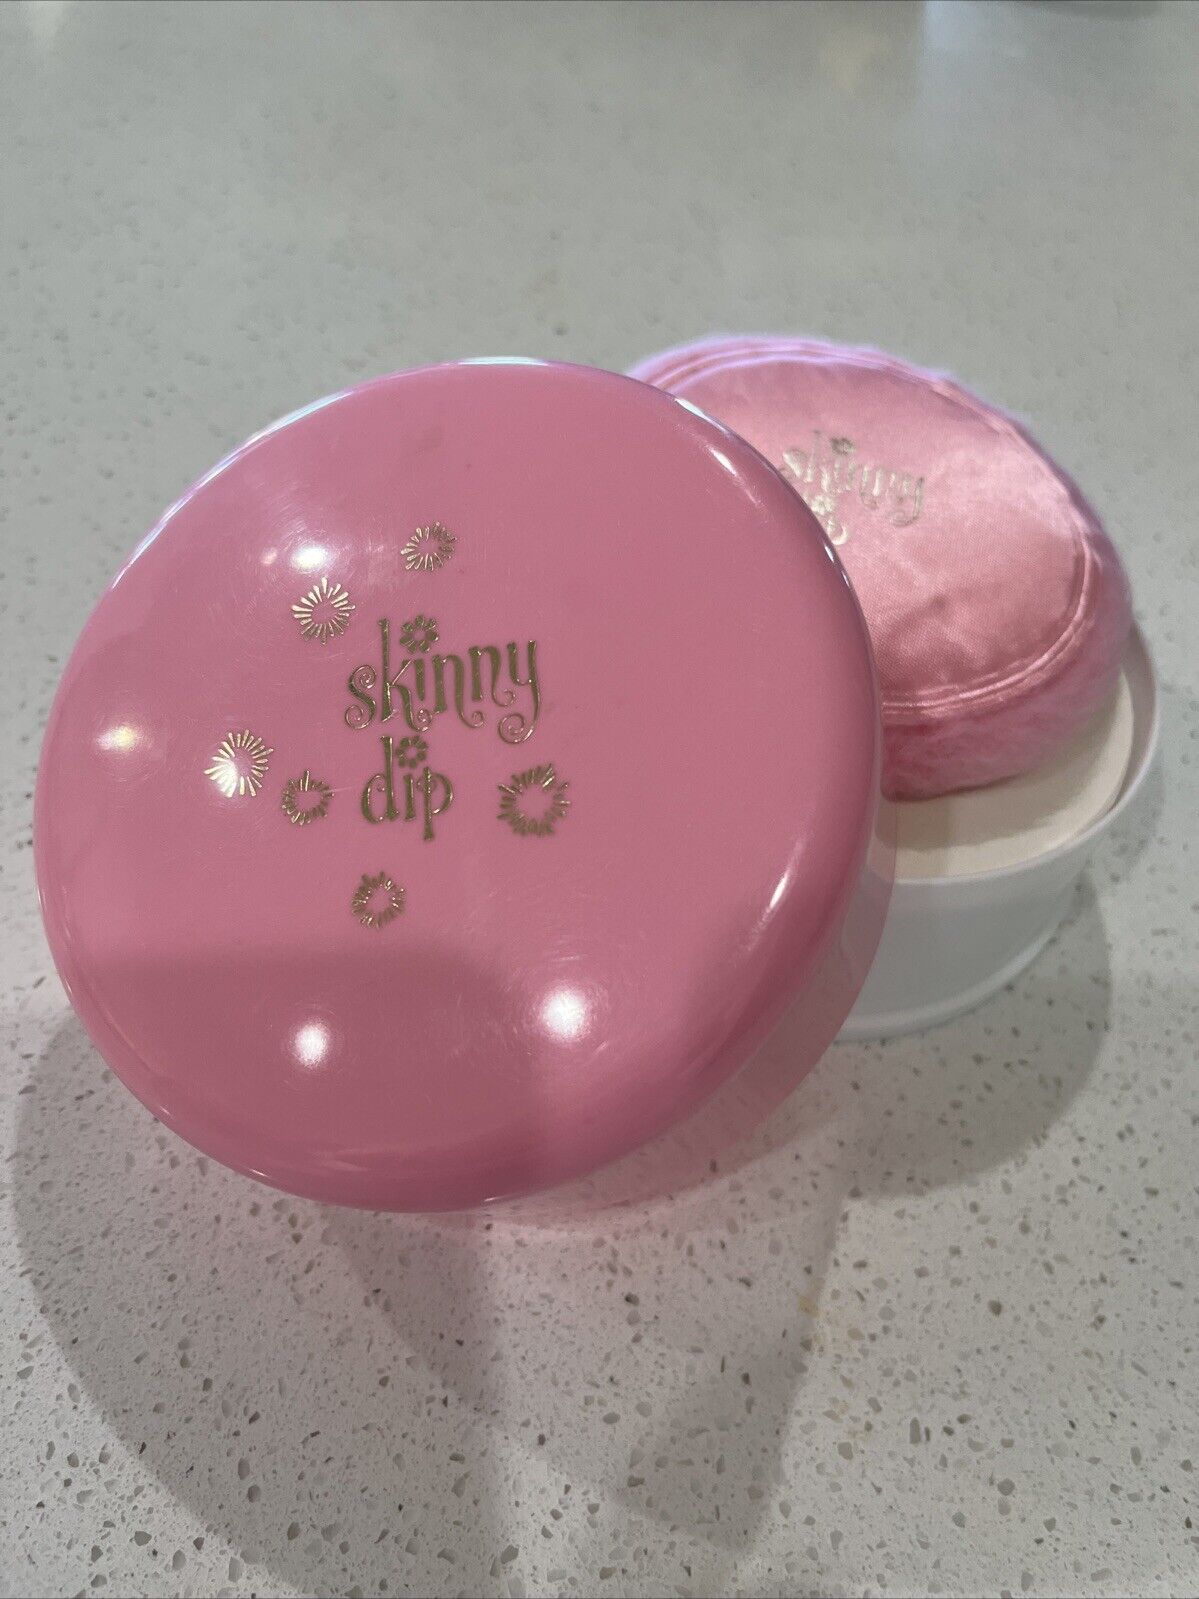 Vintage Avon Skinny Dip Beauty Dusting Powder w/ Puff 4 oz. * SEALED container